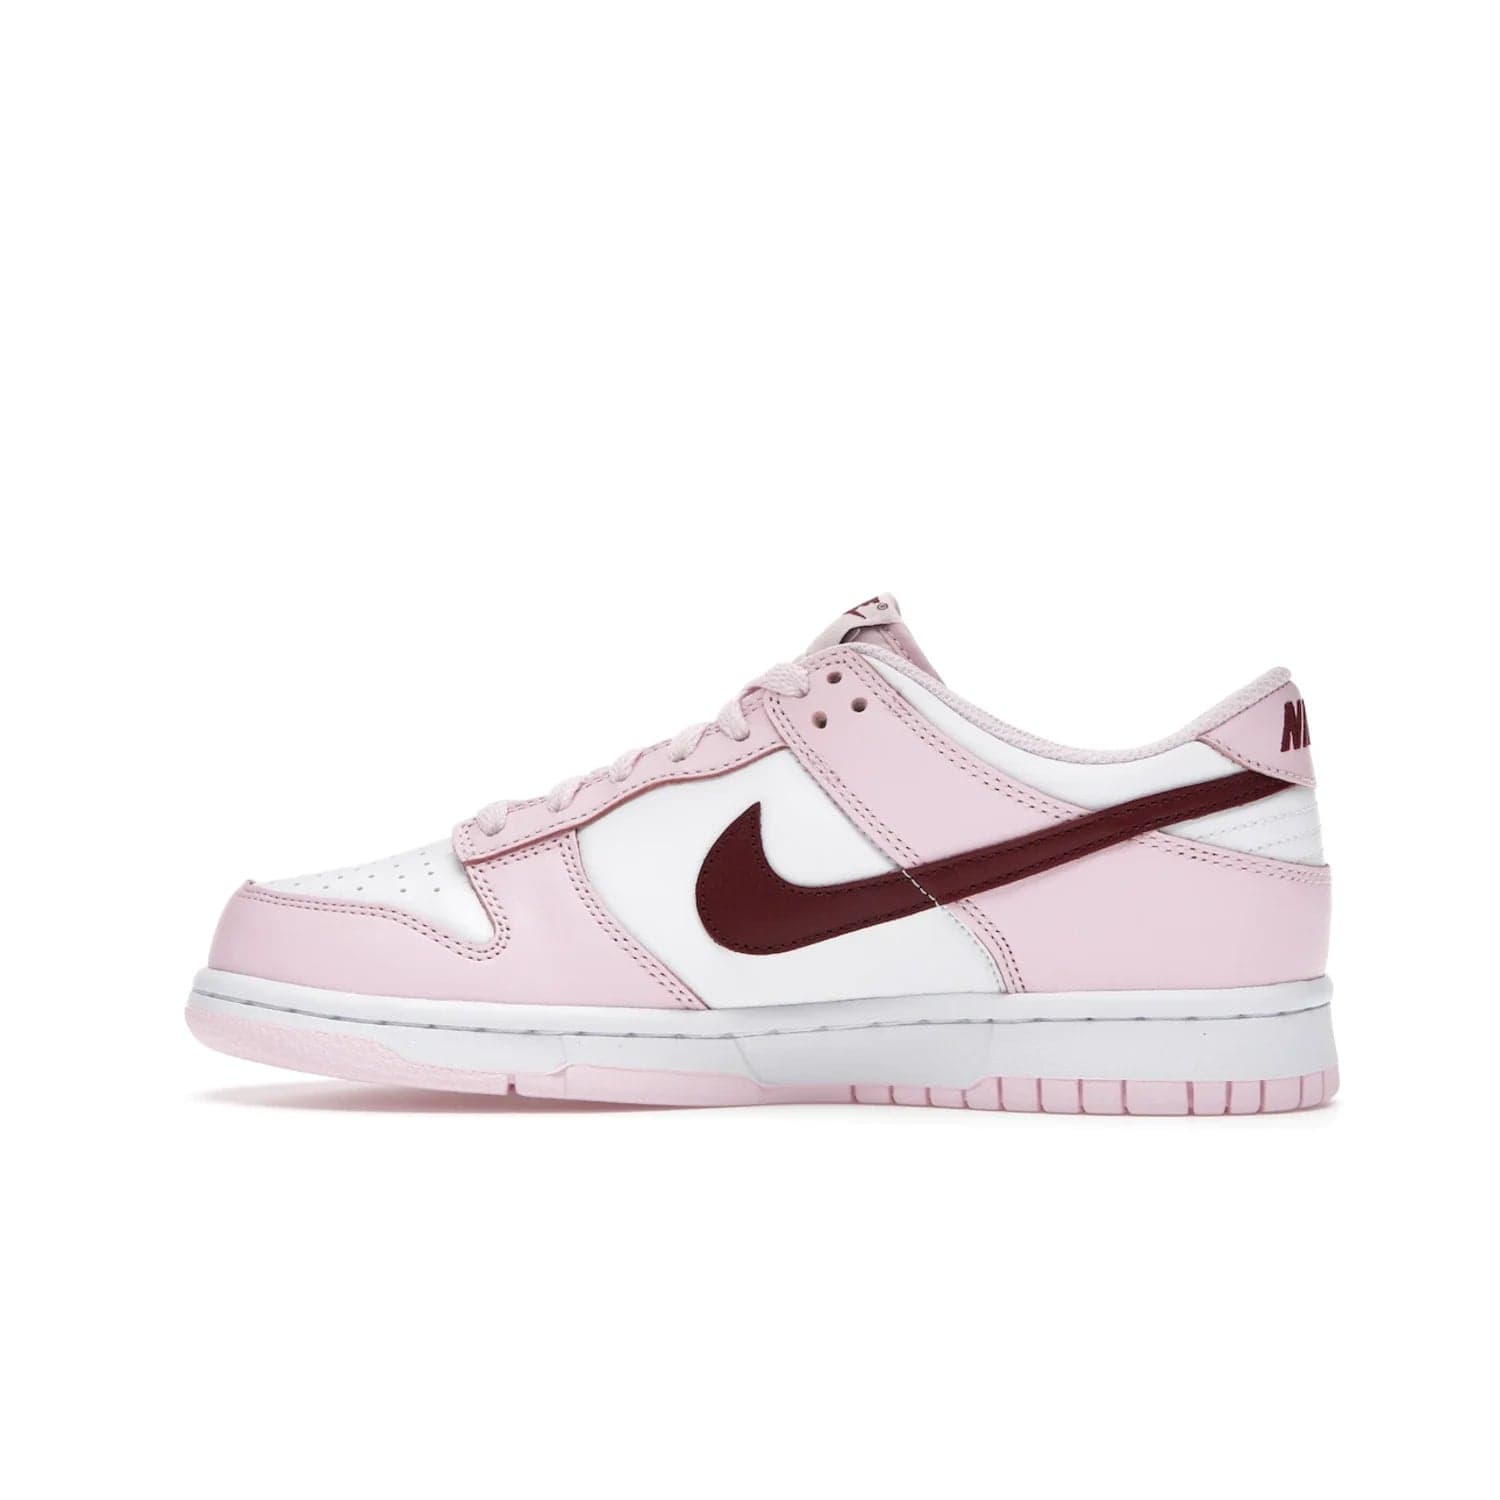 Nike Dunk Low Pink Foam Red White (GS) - Image 20 - Only at www.BallersClubKickz.com - #
Introducing the daring and stylish Nike Dunk Low Pink Foam Red White (GS) sneaker for grade schoolers. White leather with pink overlays and Dark Beetroot accents, classic Nike Dunk midsole and pink outsole. Released August 2021 for $85.